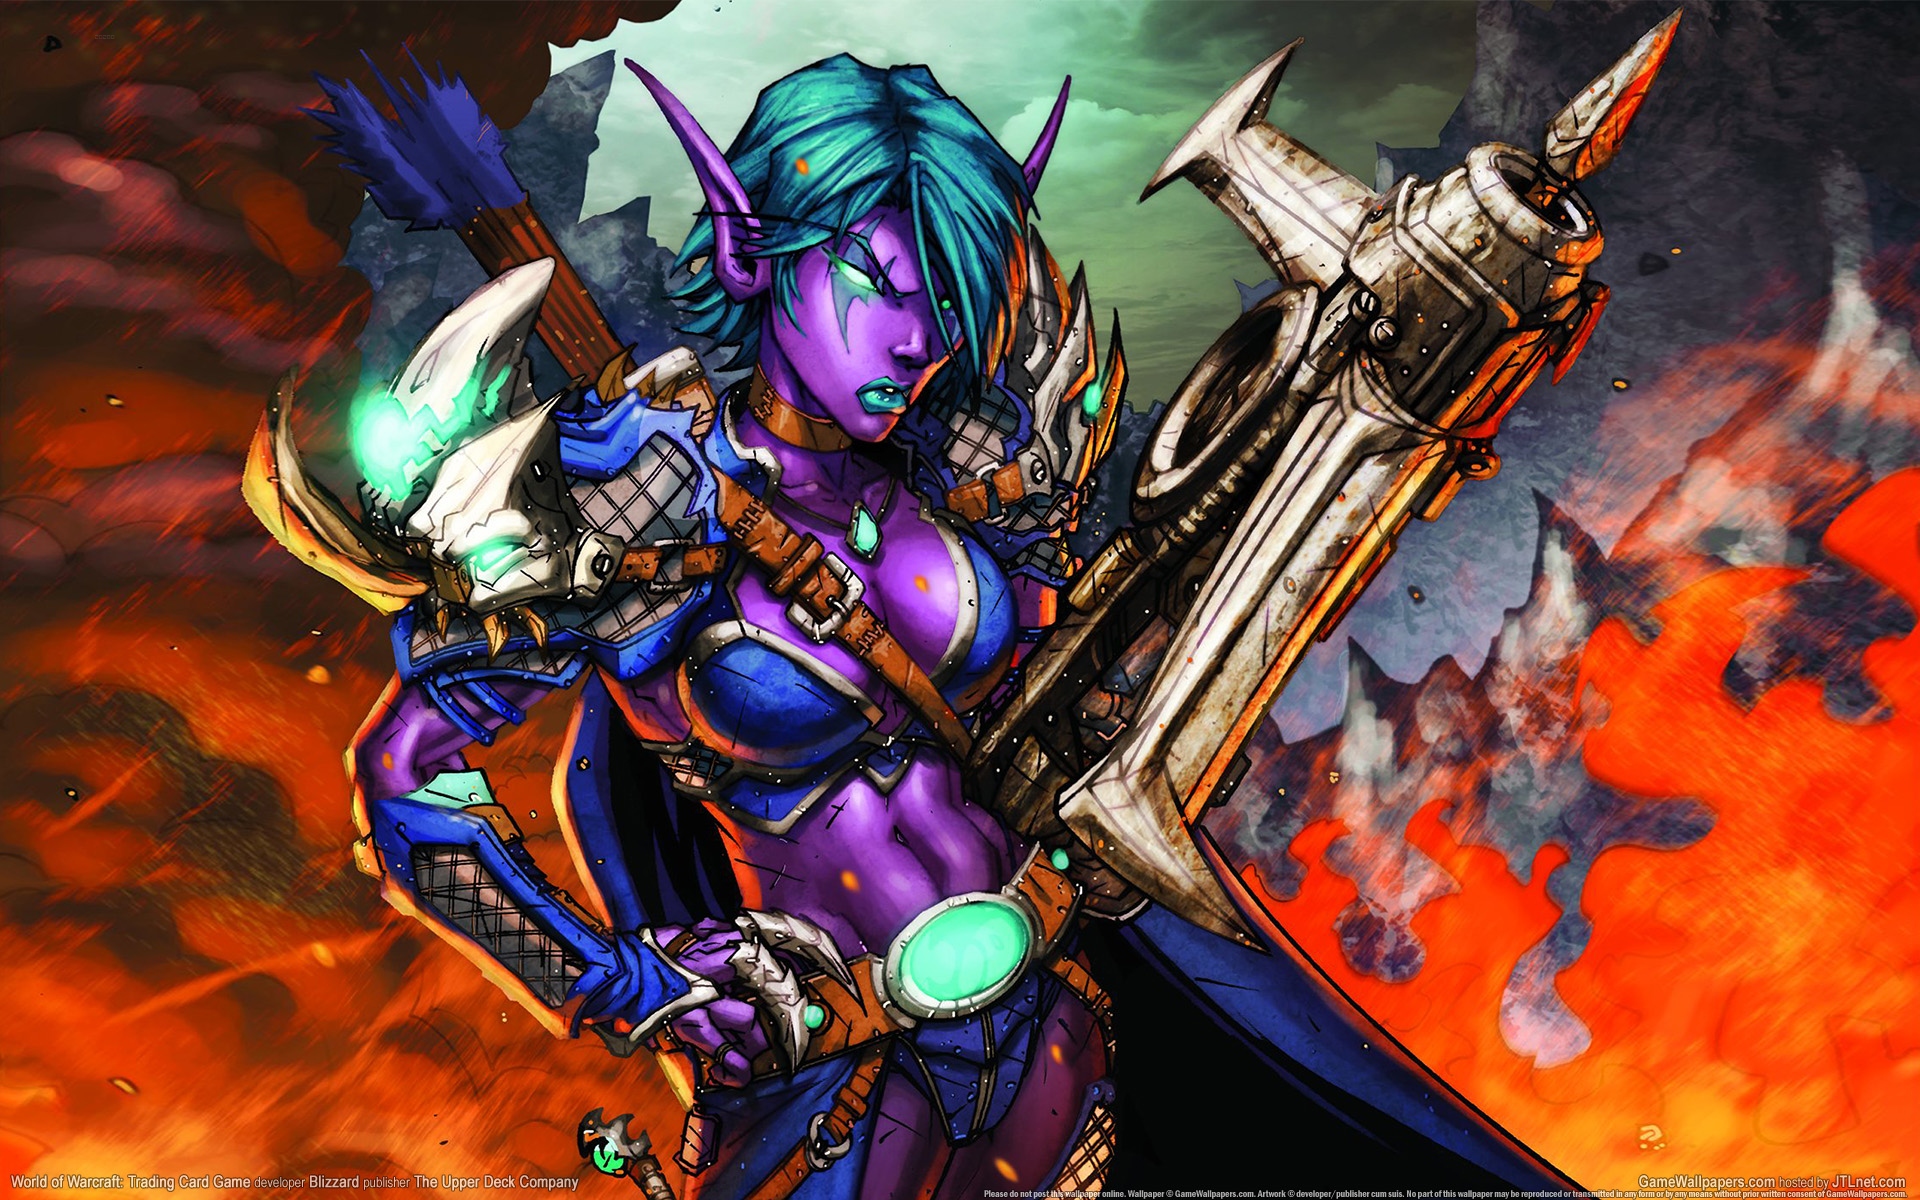 World Of Warcraft: Trading Card Game Wallpapers